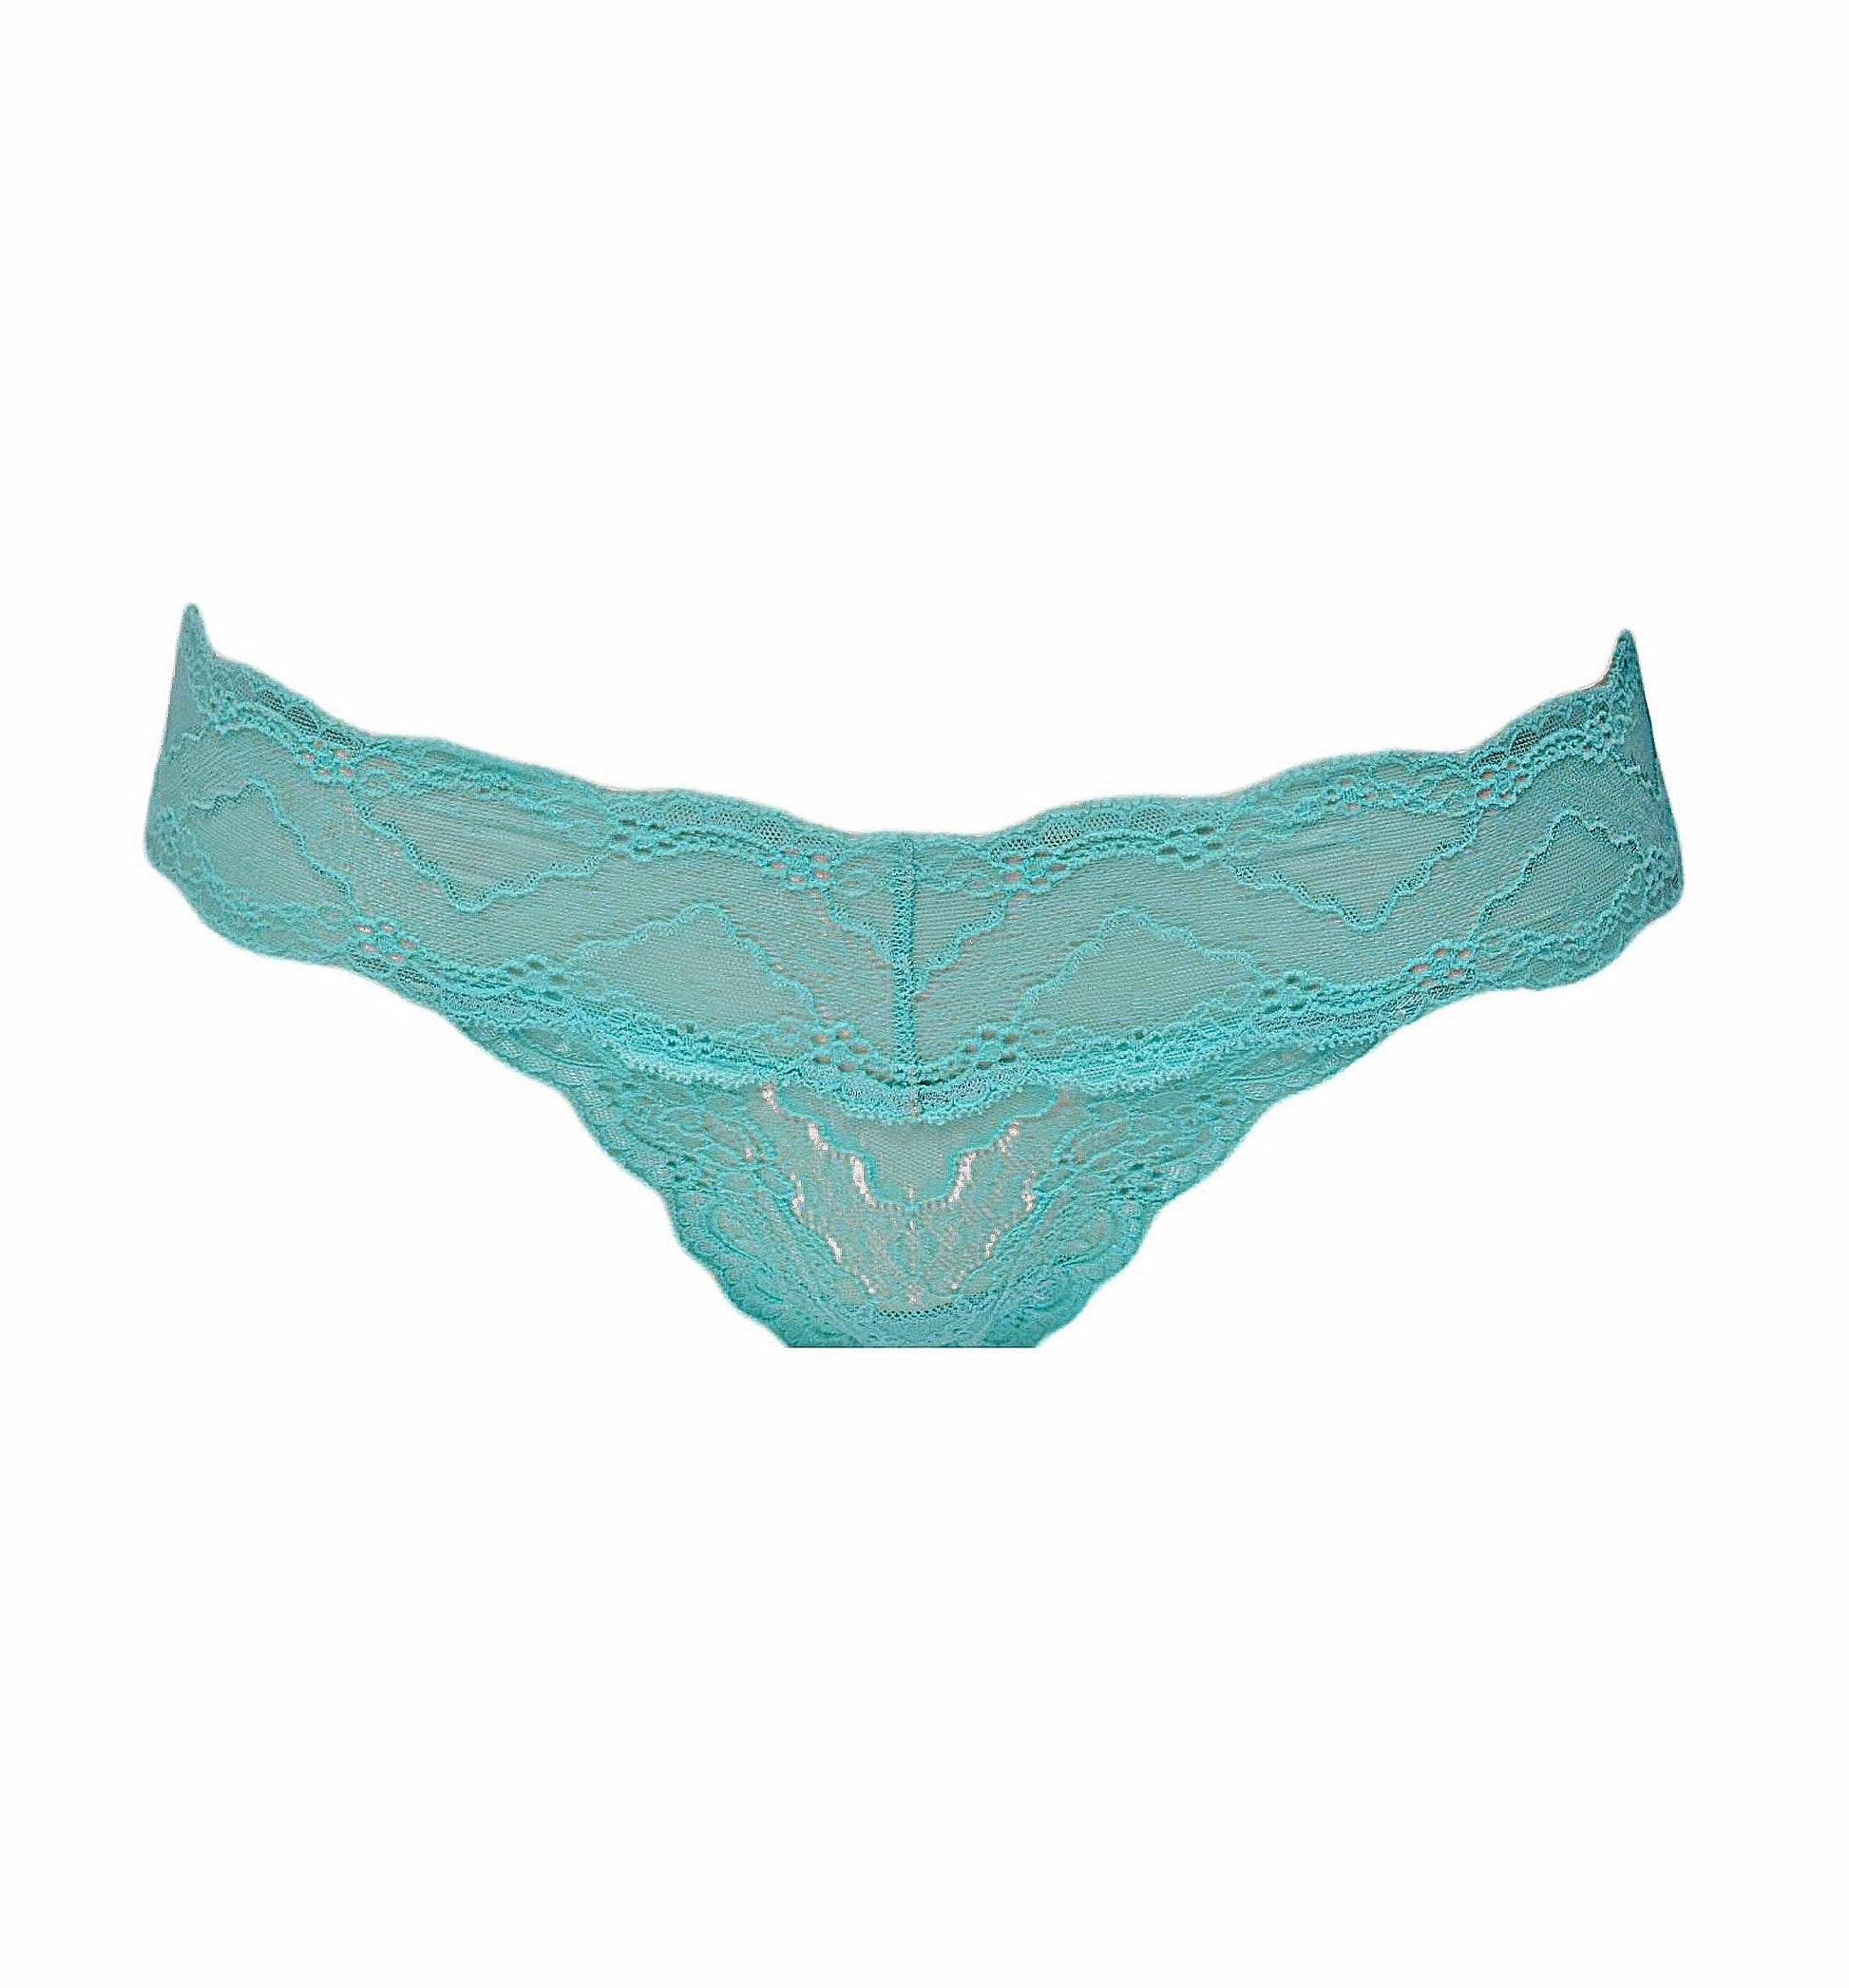 Experience Leilieve's I Love Colors Brazilian Panty, crafted from ultra-lightweight stretch lace. This vibrant and feminine piece of lingerie offers breathable comfort throughout your day.